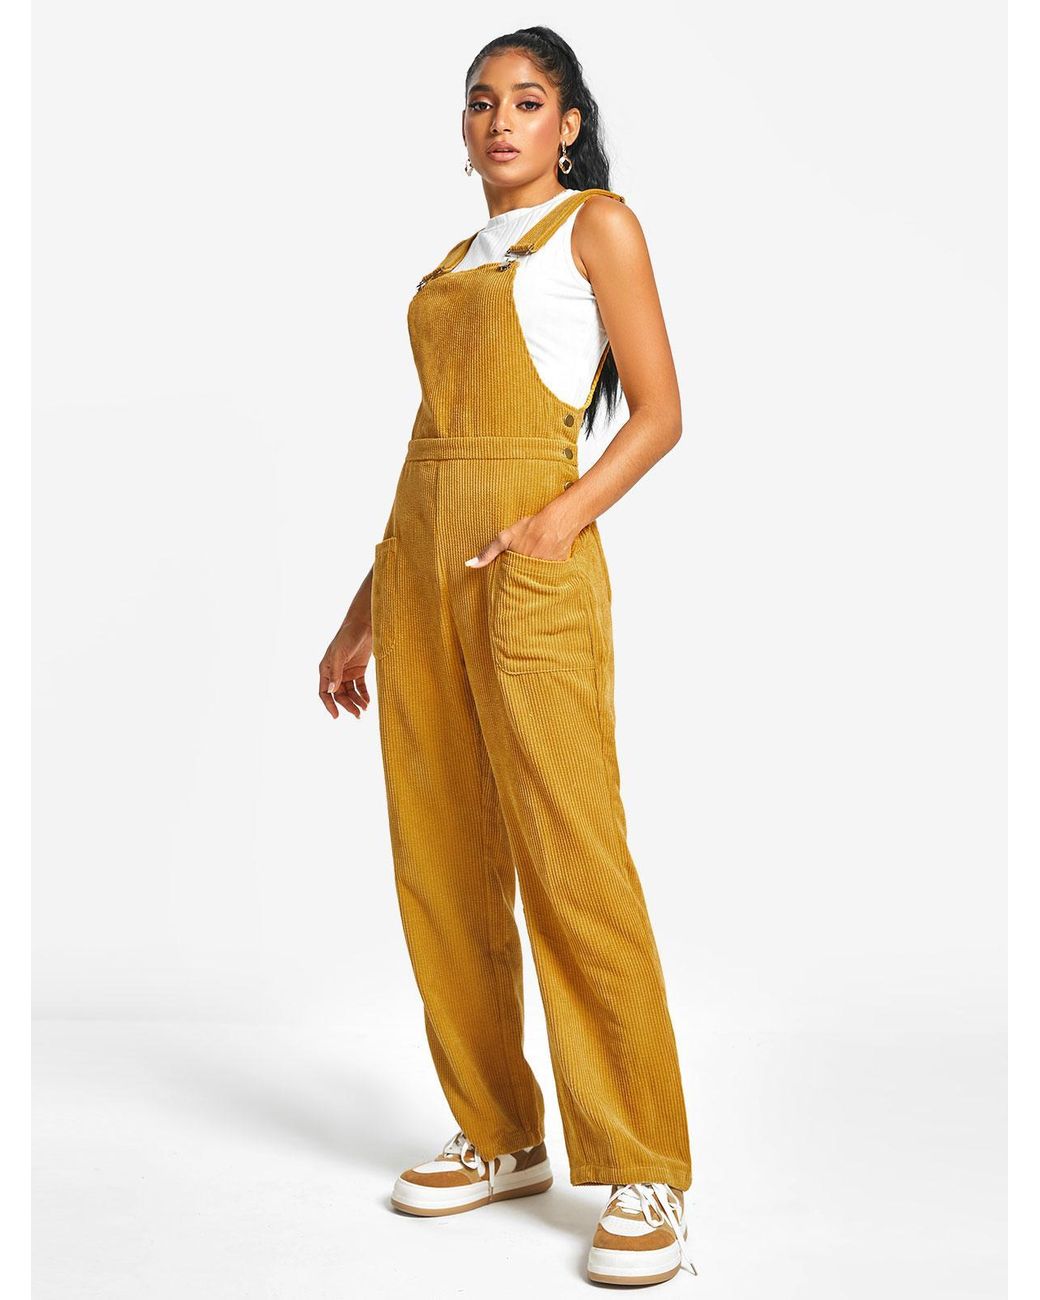 Zaful Pockets Corduroy Overalls Jumpsuit in Yellow | Lyst